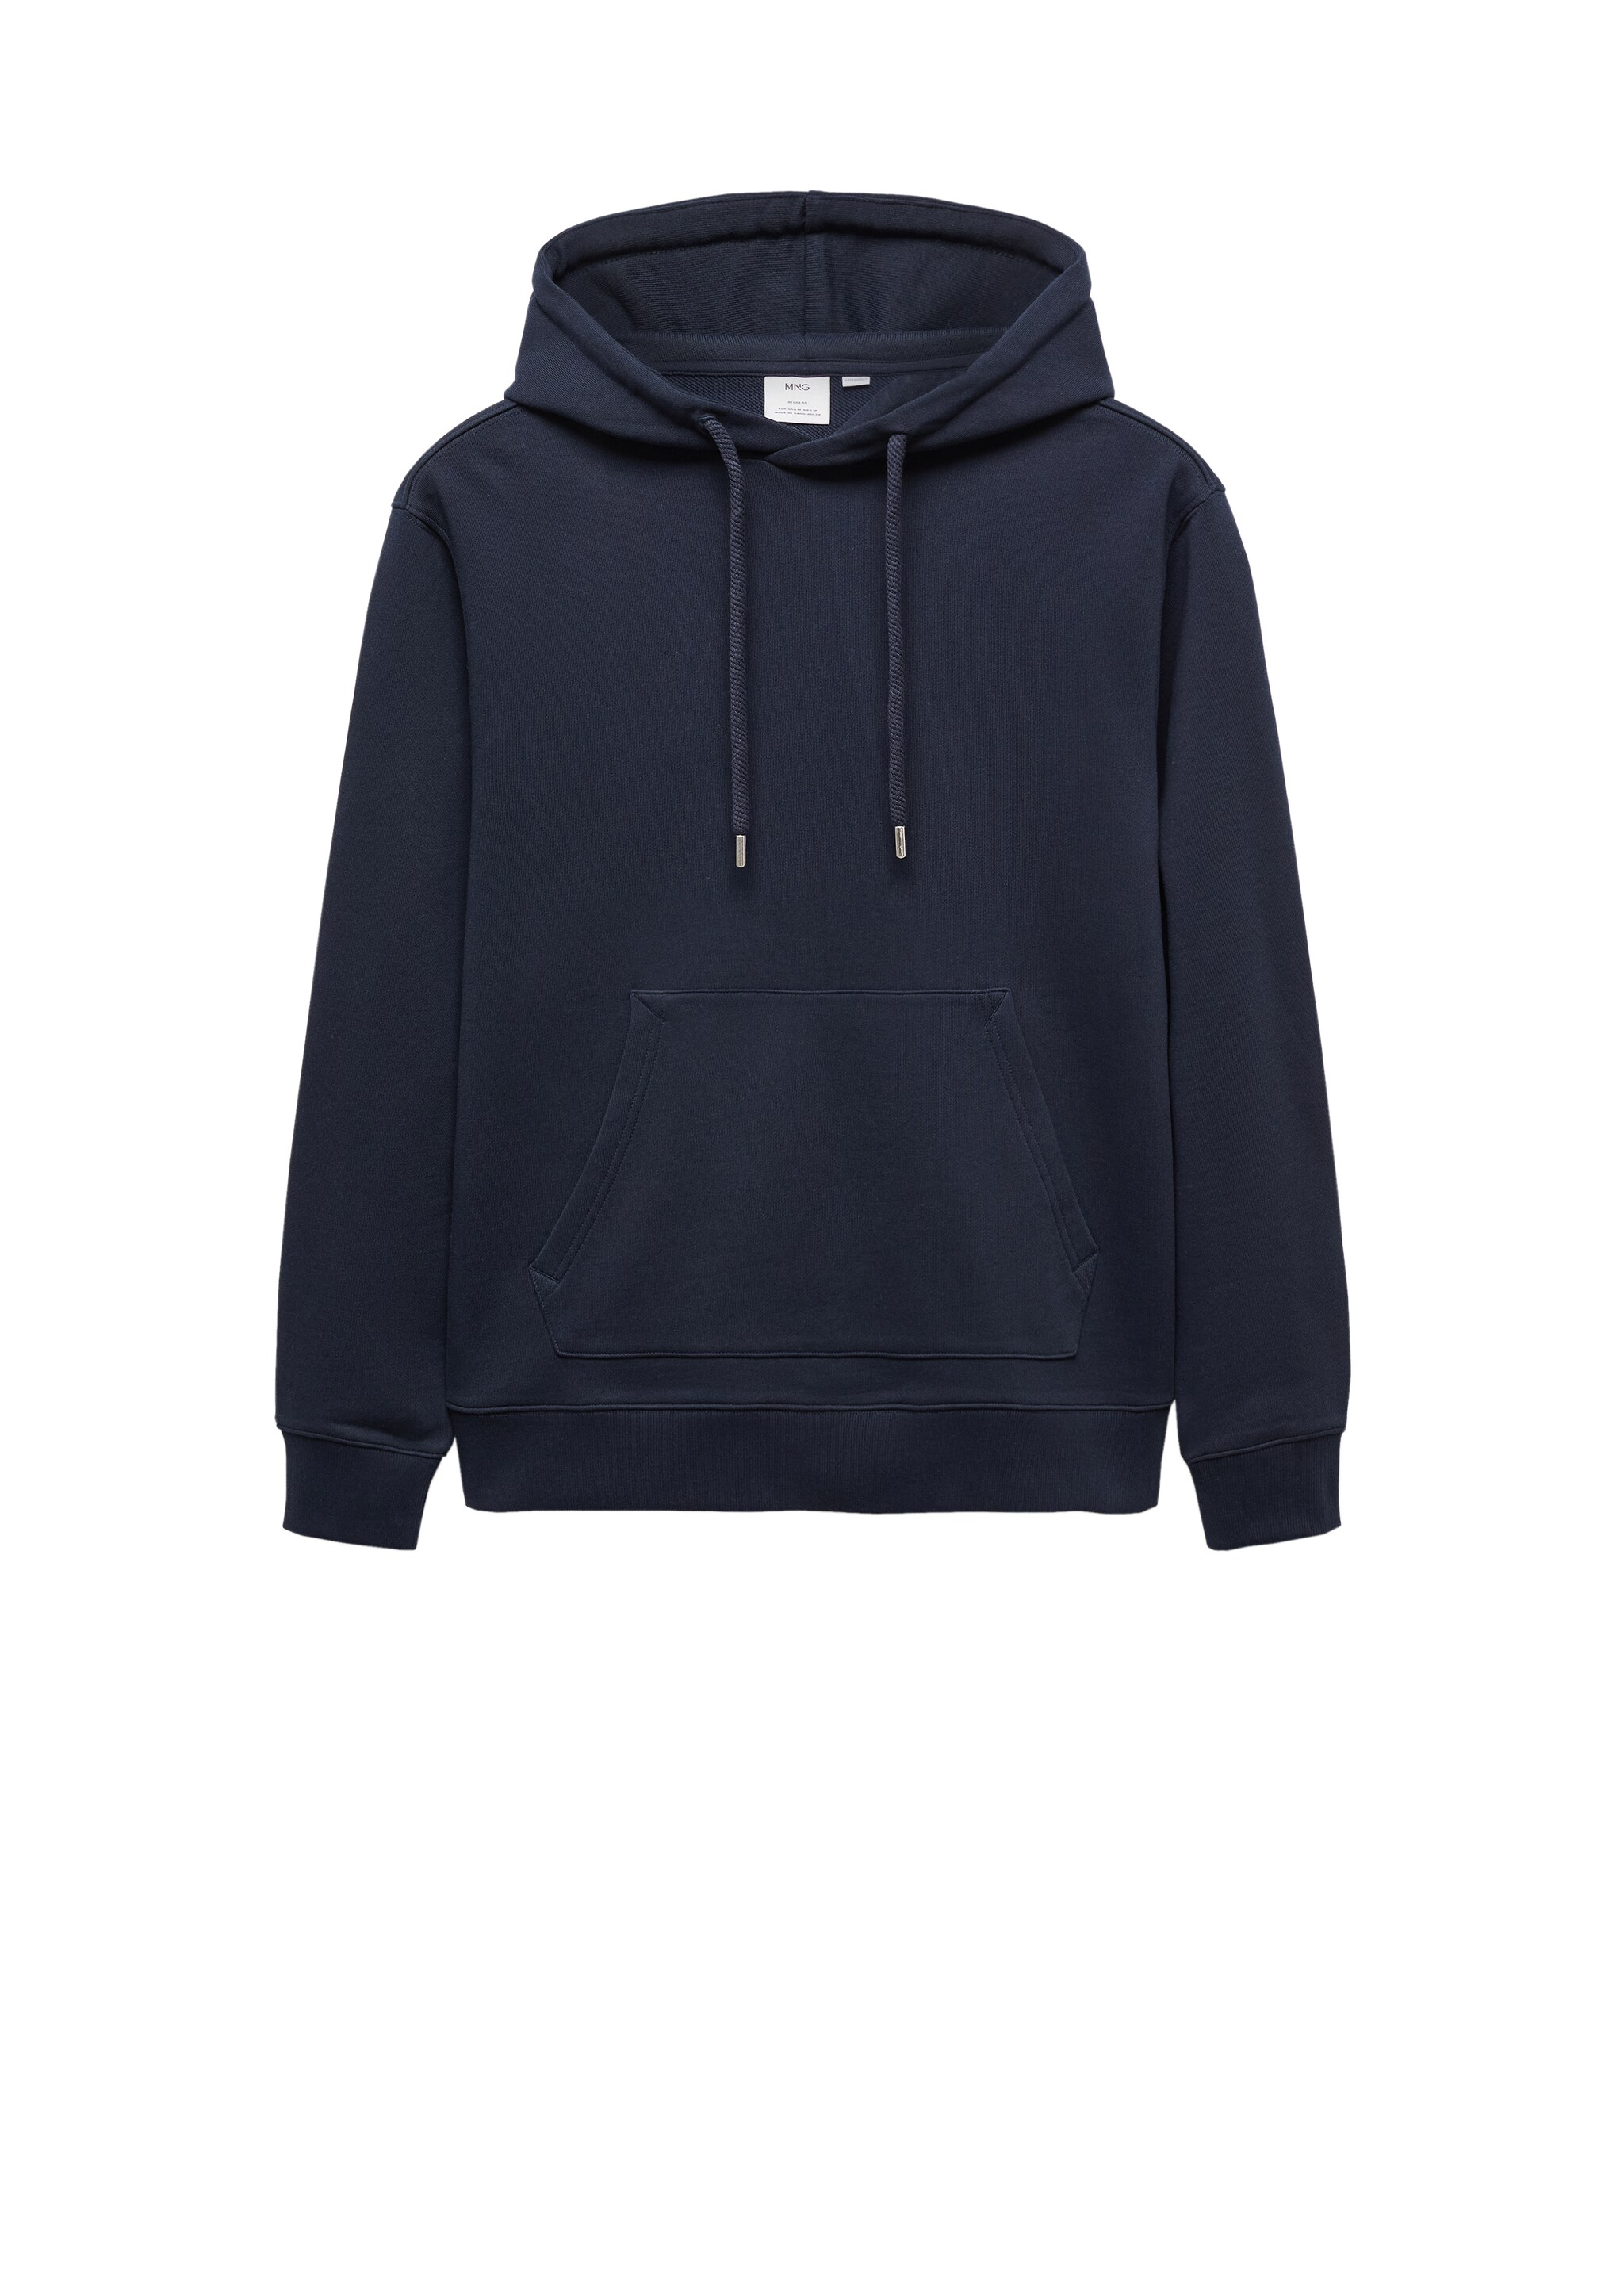 Lightweight cotton hooded sweatshirt - Details of the article 9